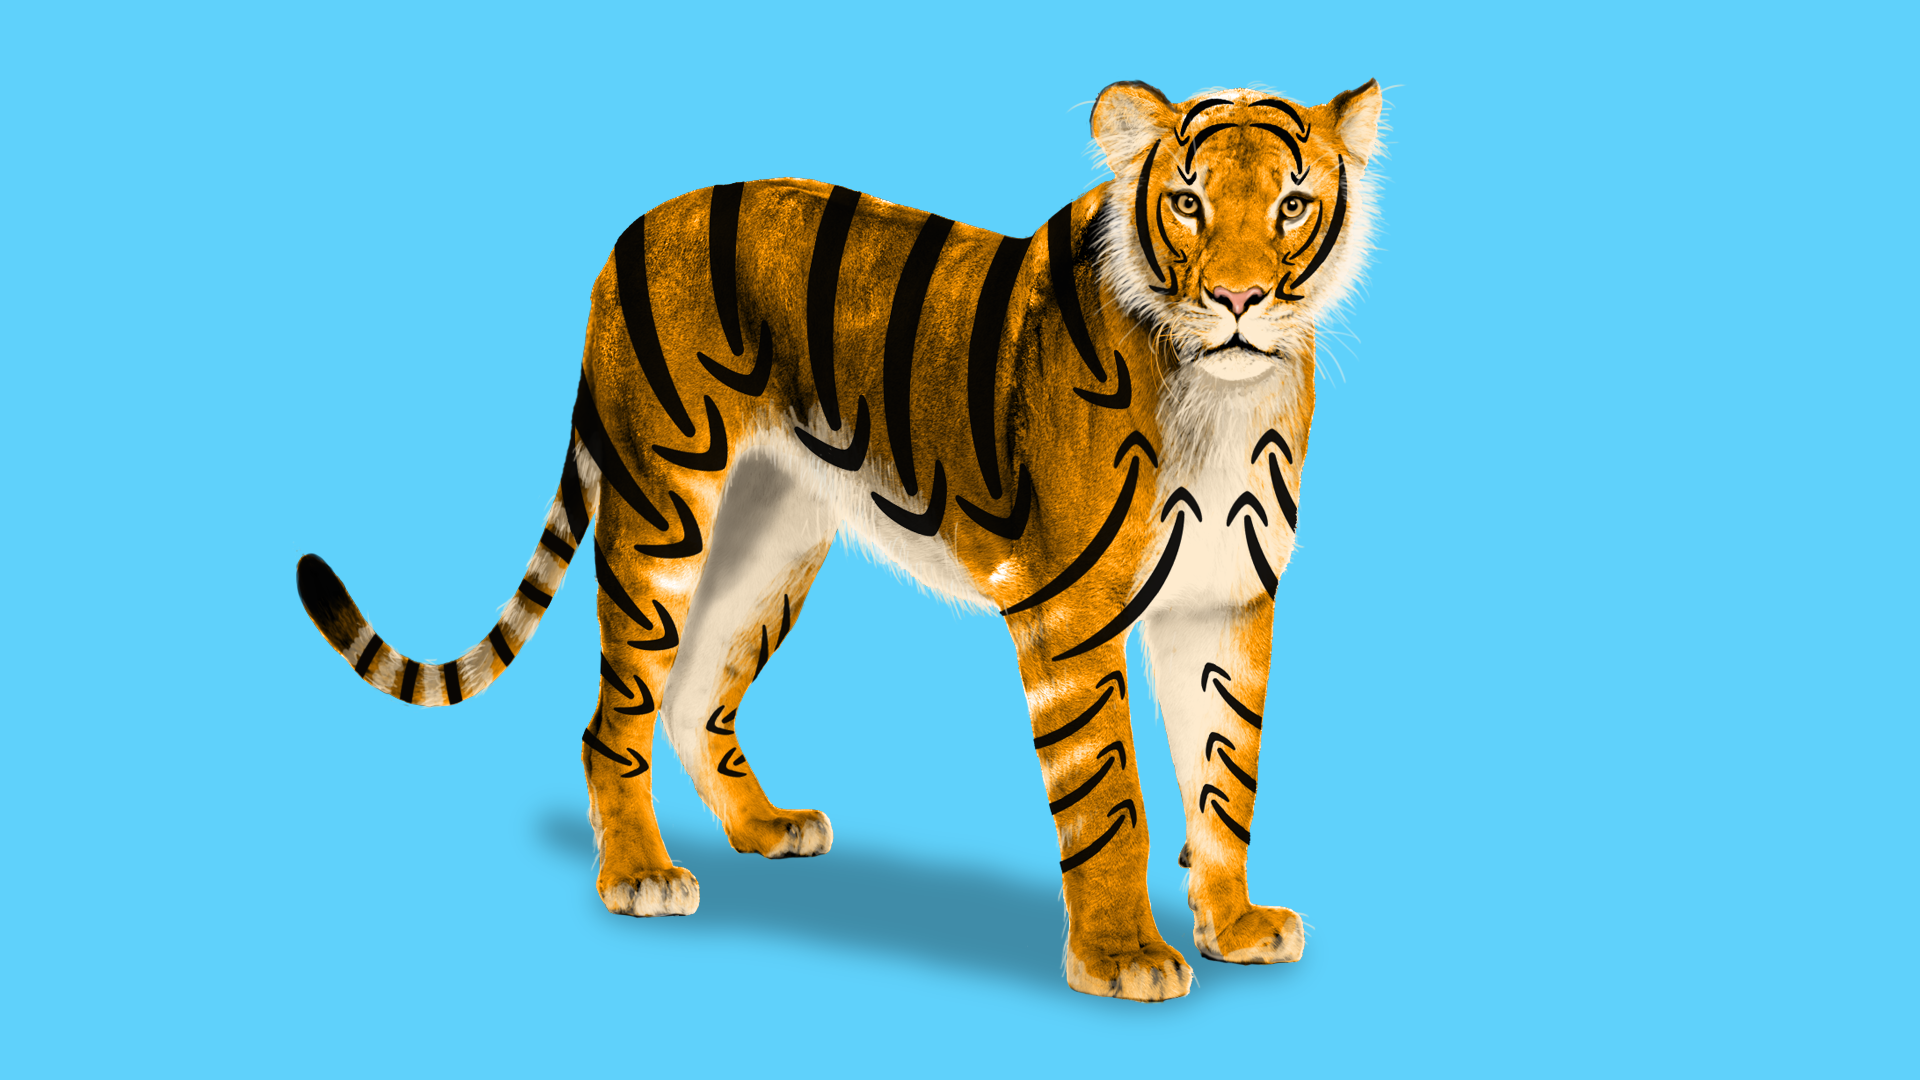 illustration of a tiger with the amazon arrow logo for its stripes